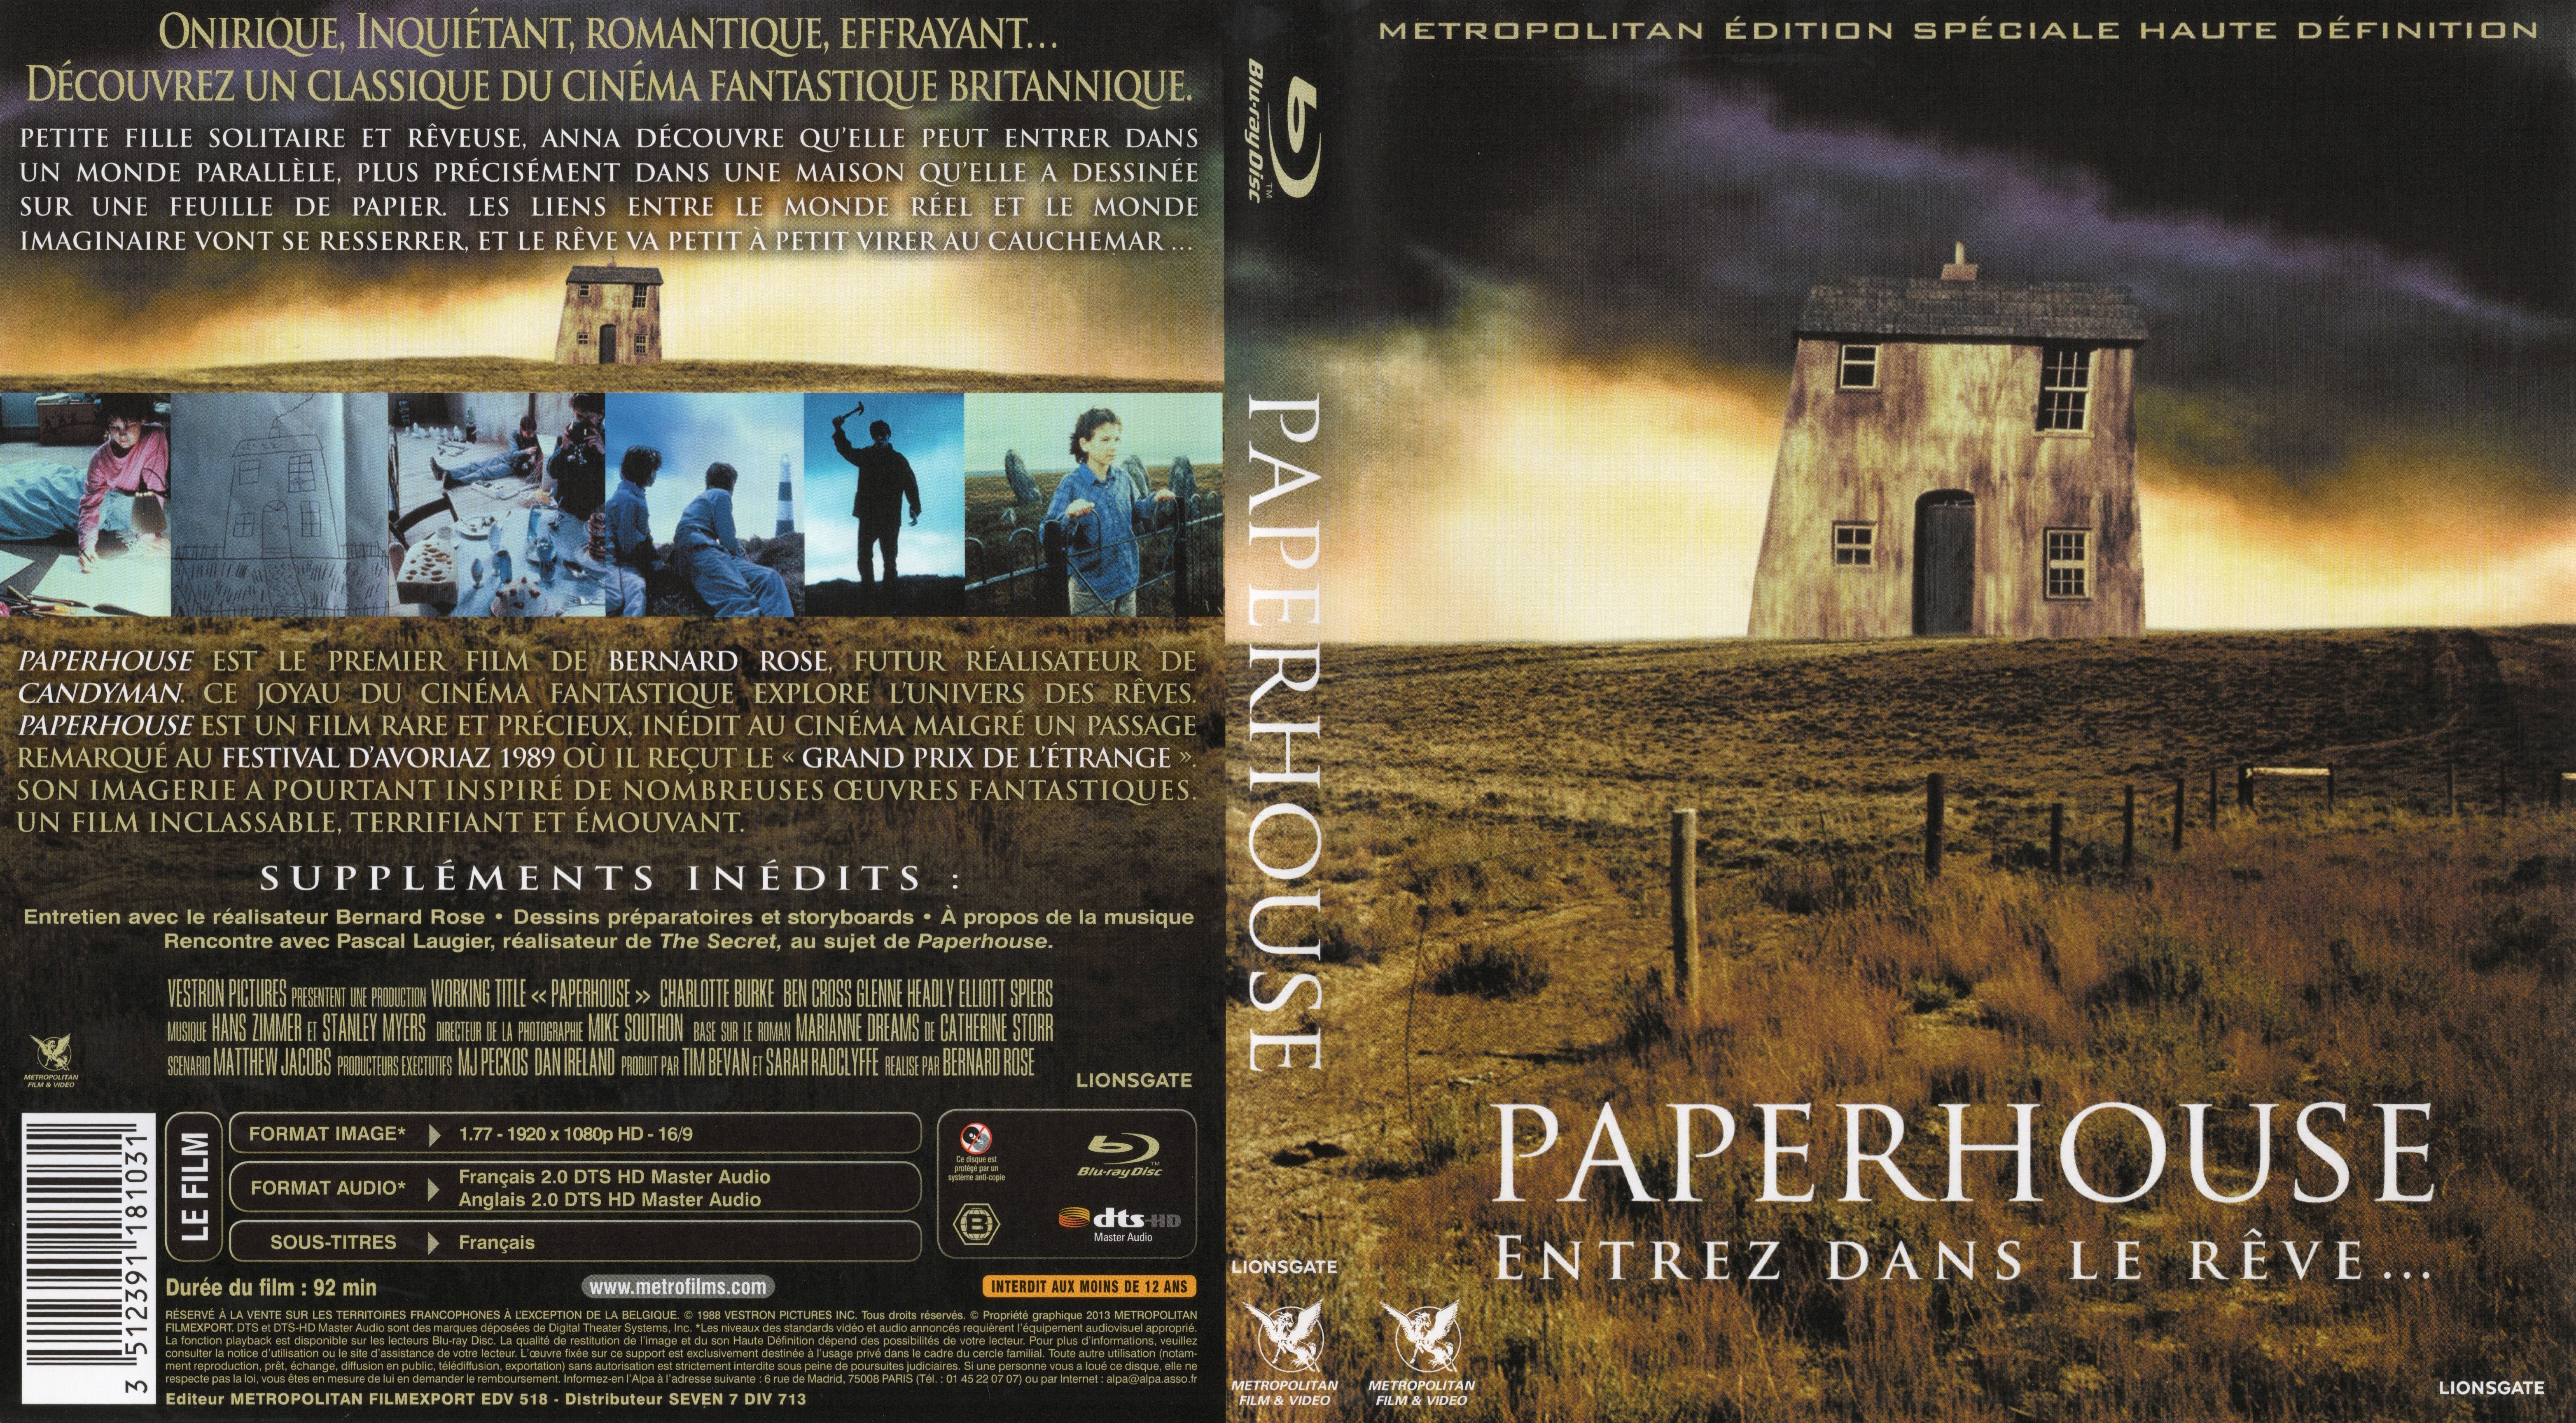 Jaquette DVD Paperhouse (BLU-RAY)